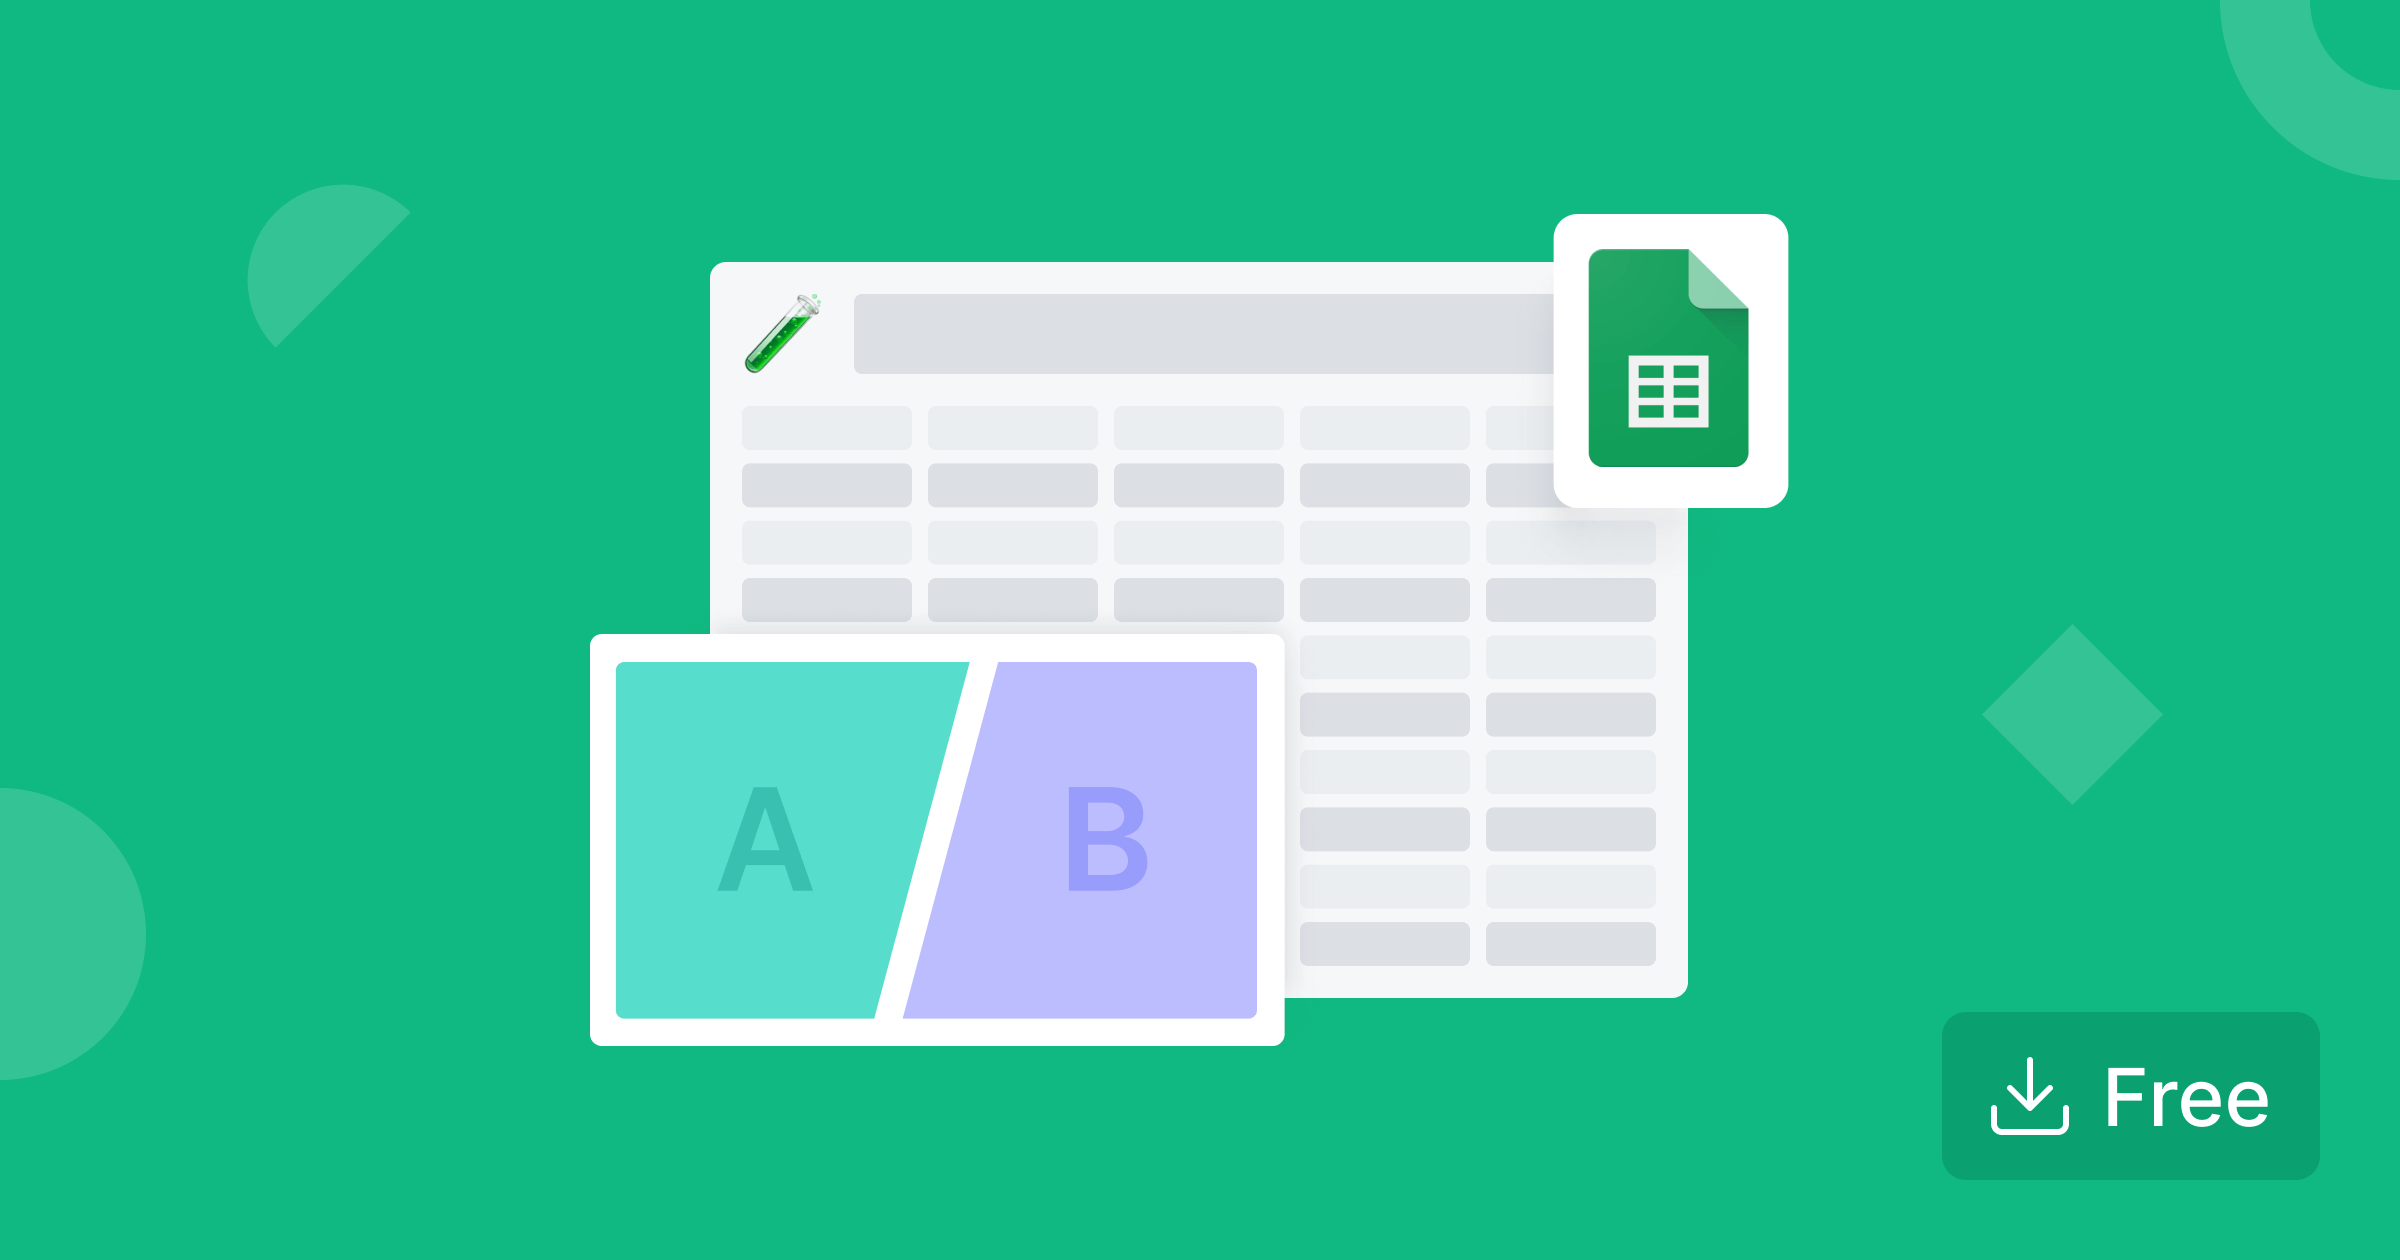 A spreadsheet wireframe and a website wireframe with the left side in green with an A in the middle and the right side in purple with a B in the middle representing an AB test.